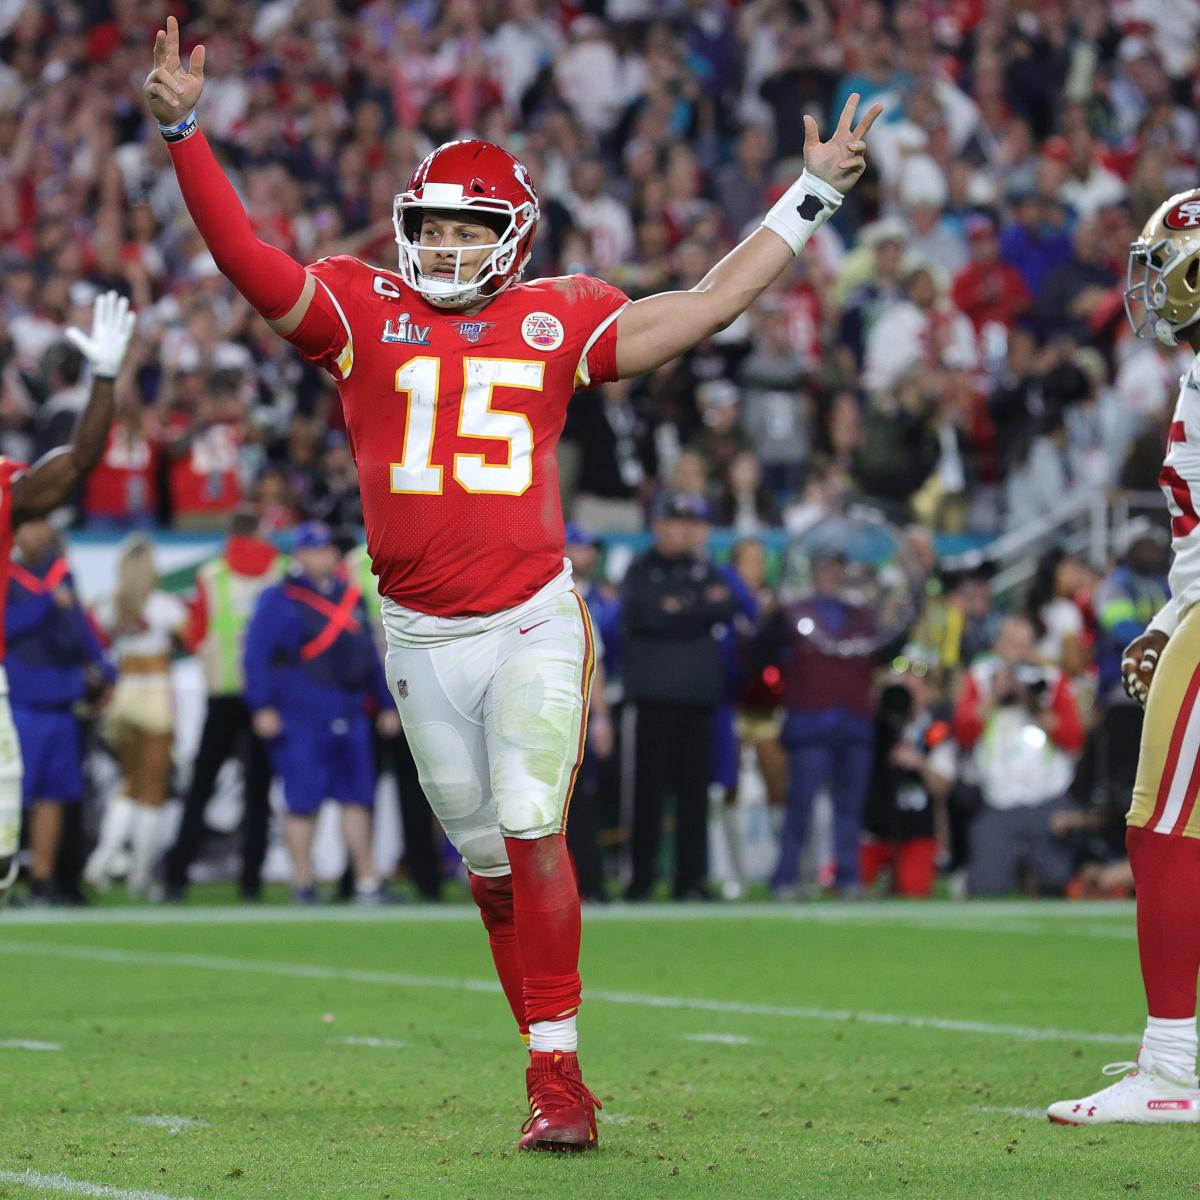 Patrick Mahomes Leads Epic Rally as Chiefs 49ers 31-20 to Win Super Bowl 54 | News, Scores, Highlights, and Rumors Bleacher Report